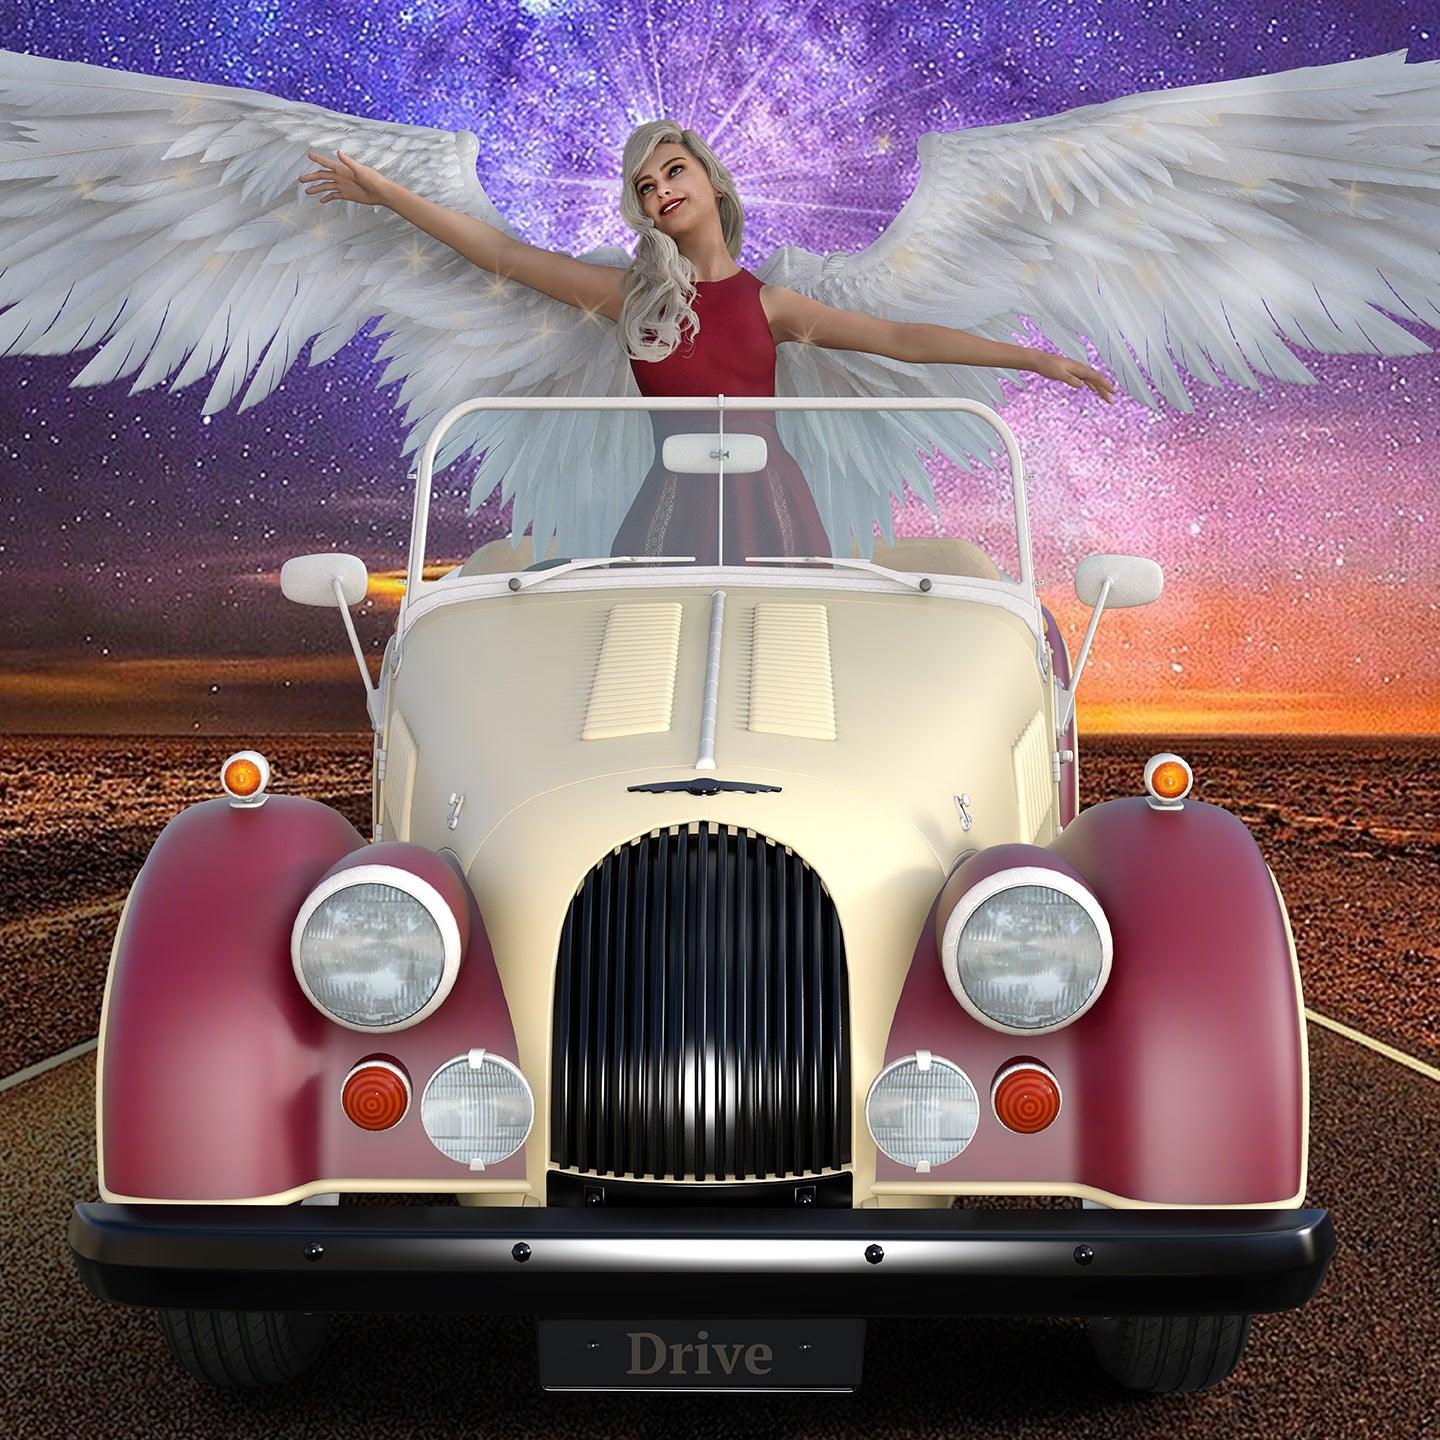 More Than Charms Angel of Adventure The Angel of Adventure reminds us to create an adventure mindset to everyday life challenges and situations. With this mindset is in play, the impossible becomes the possible. Dreams can be turned into reality as we all